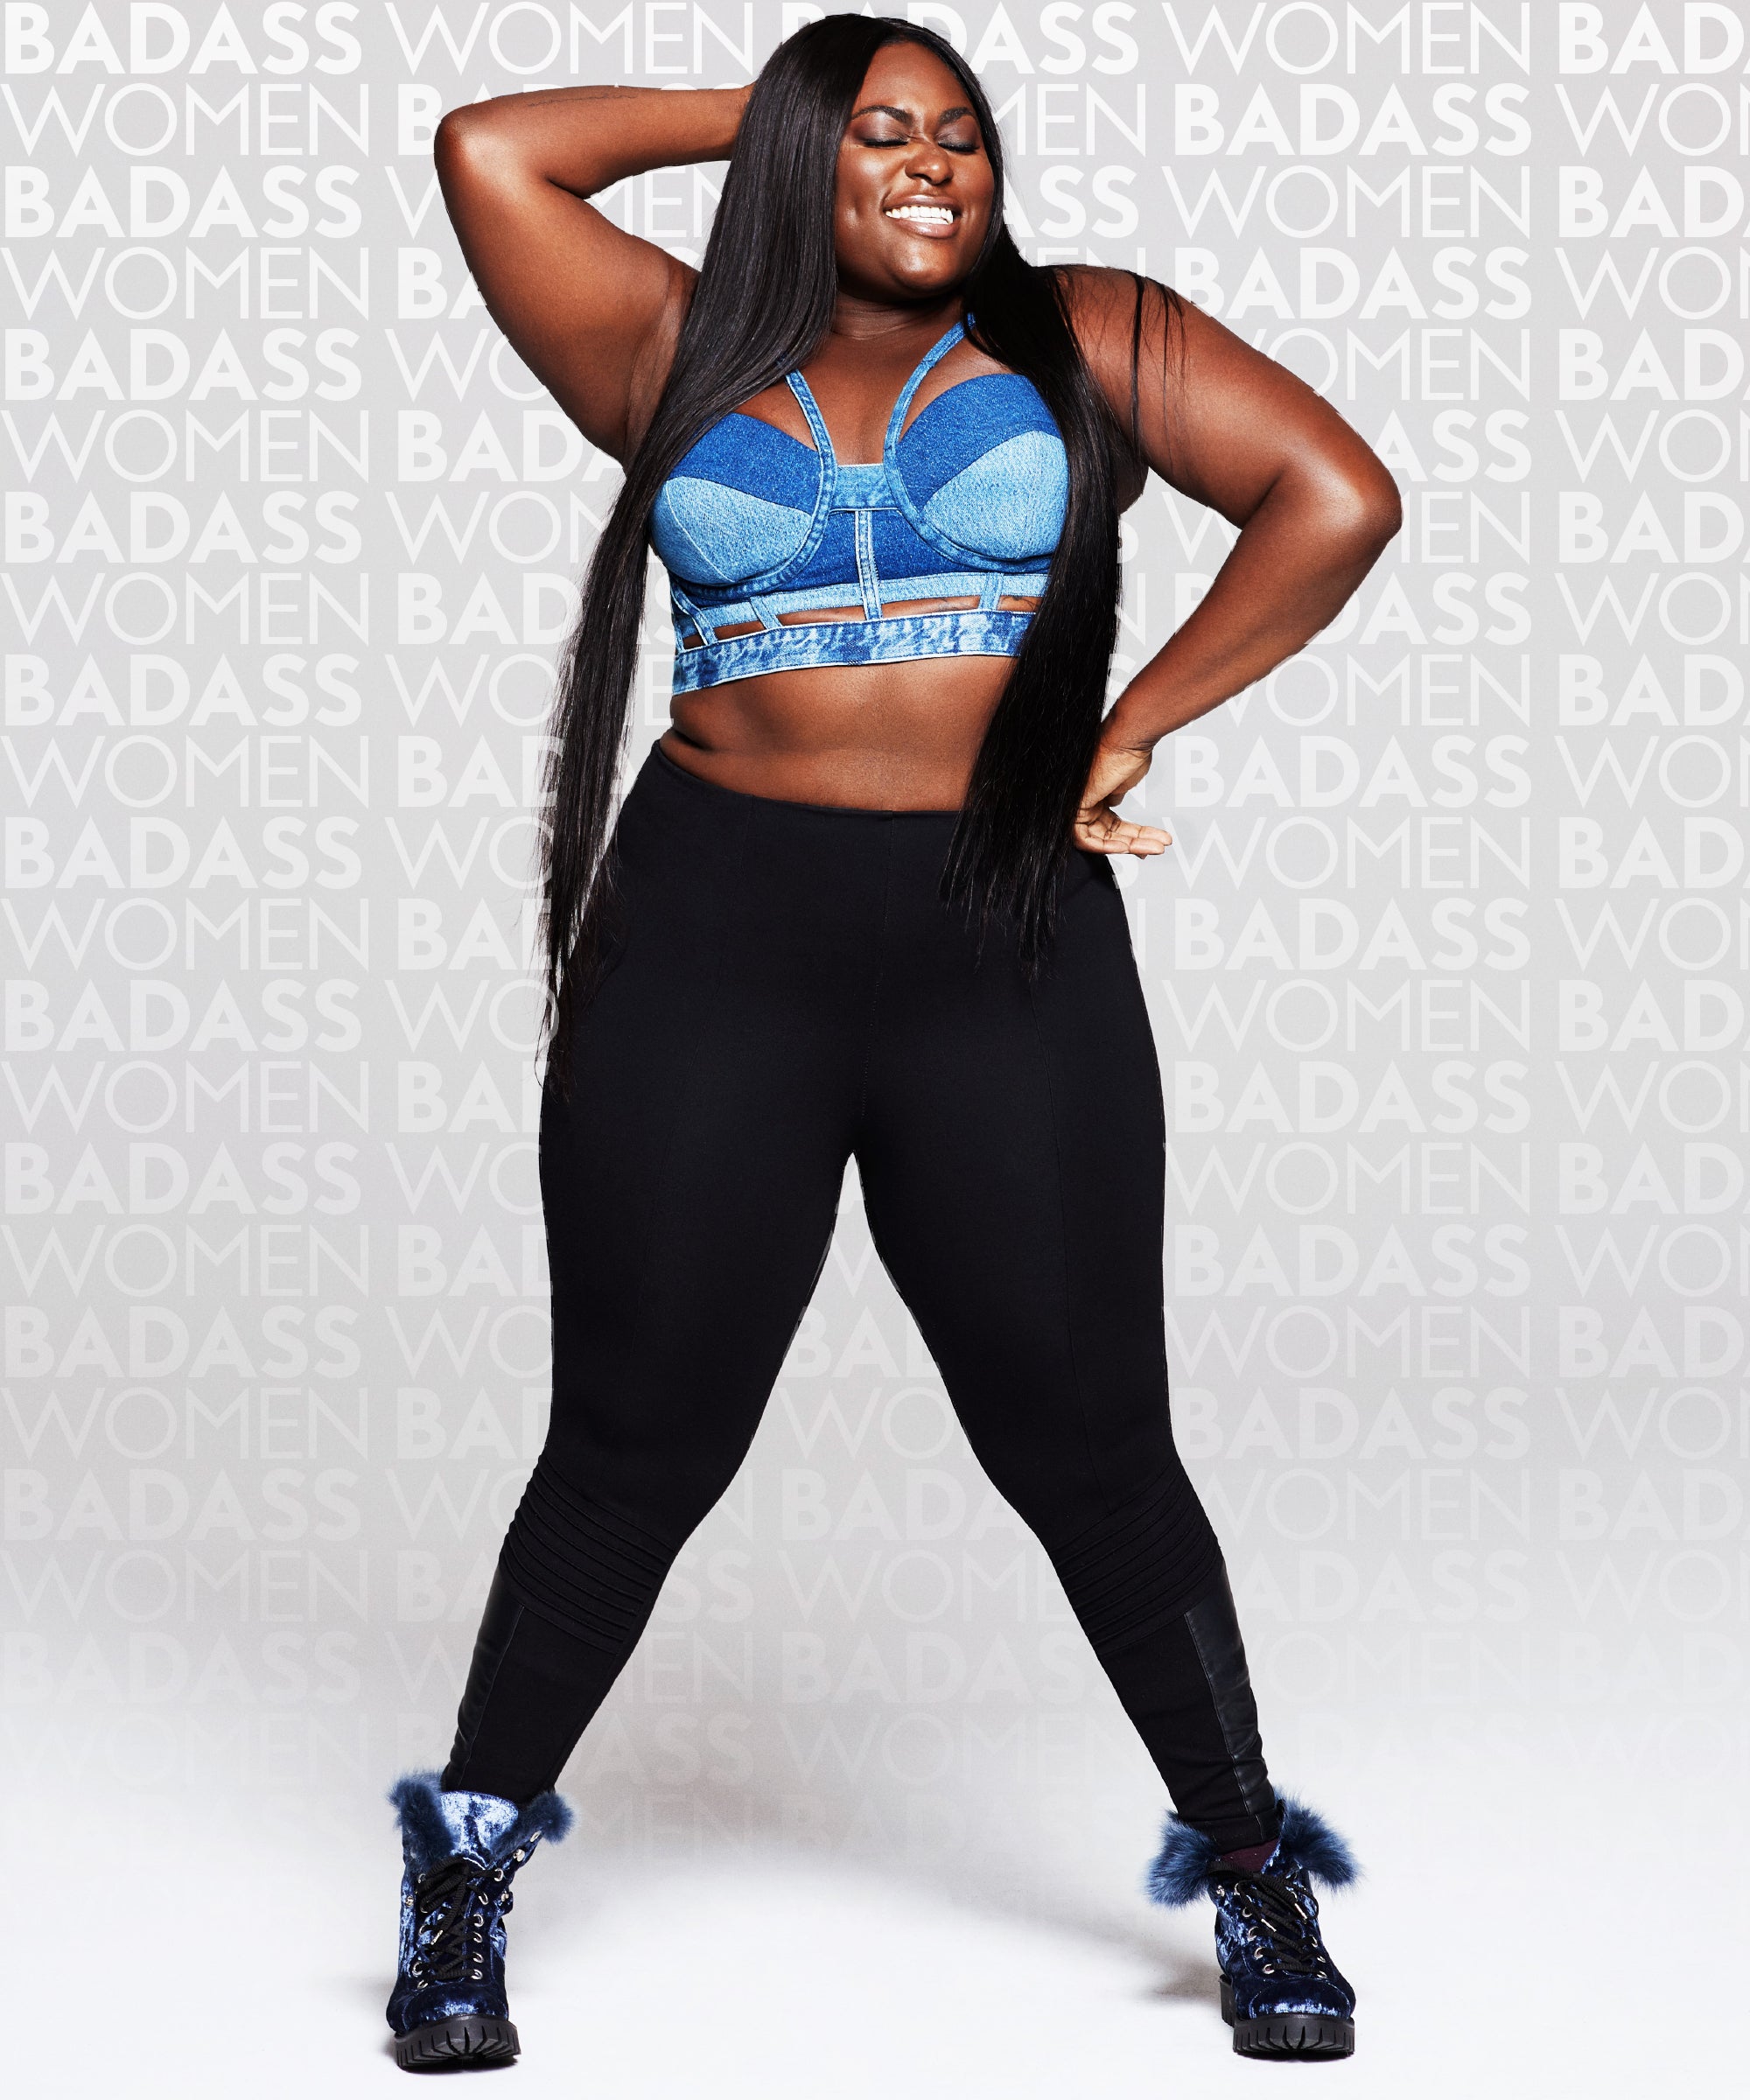 Why Actress Danielle Brooks Doesn't Make New Year's Resolutions